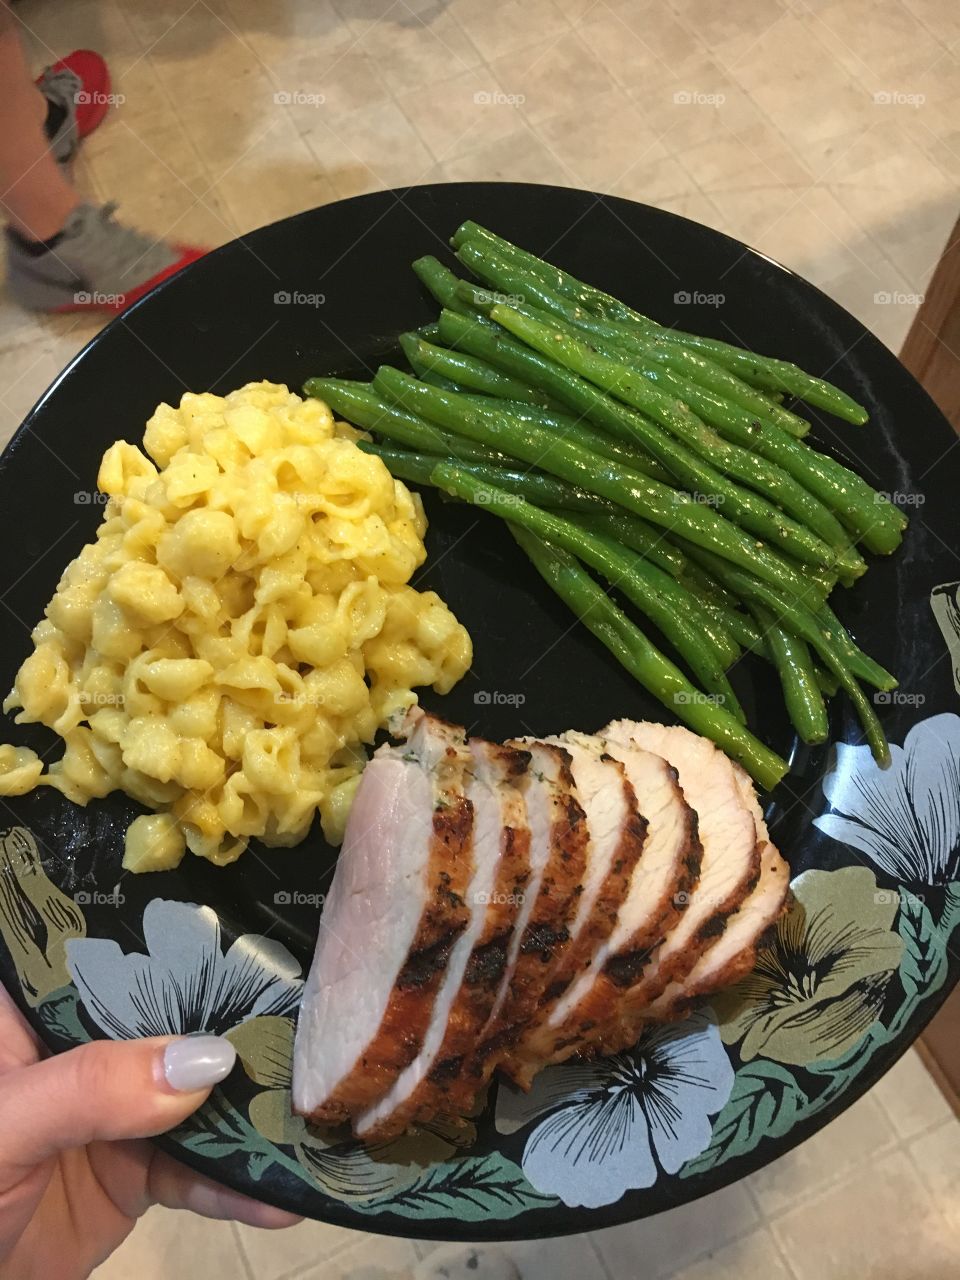 Pork loin with homemade Mac and cheese and steamed green beans